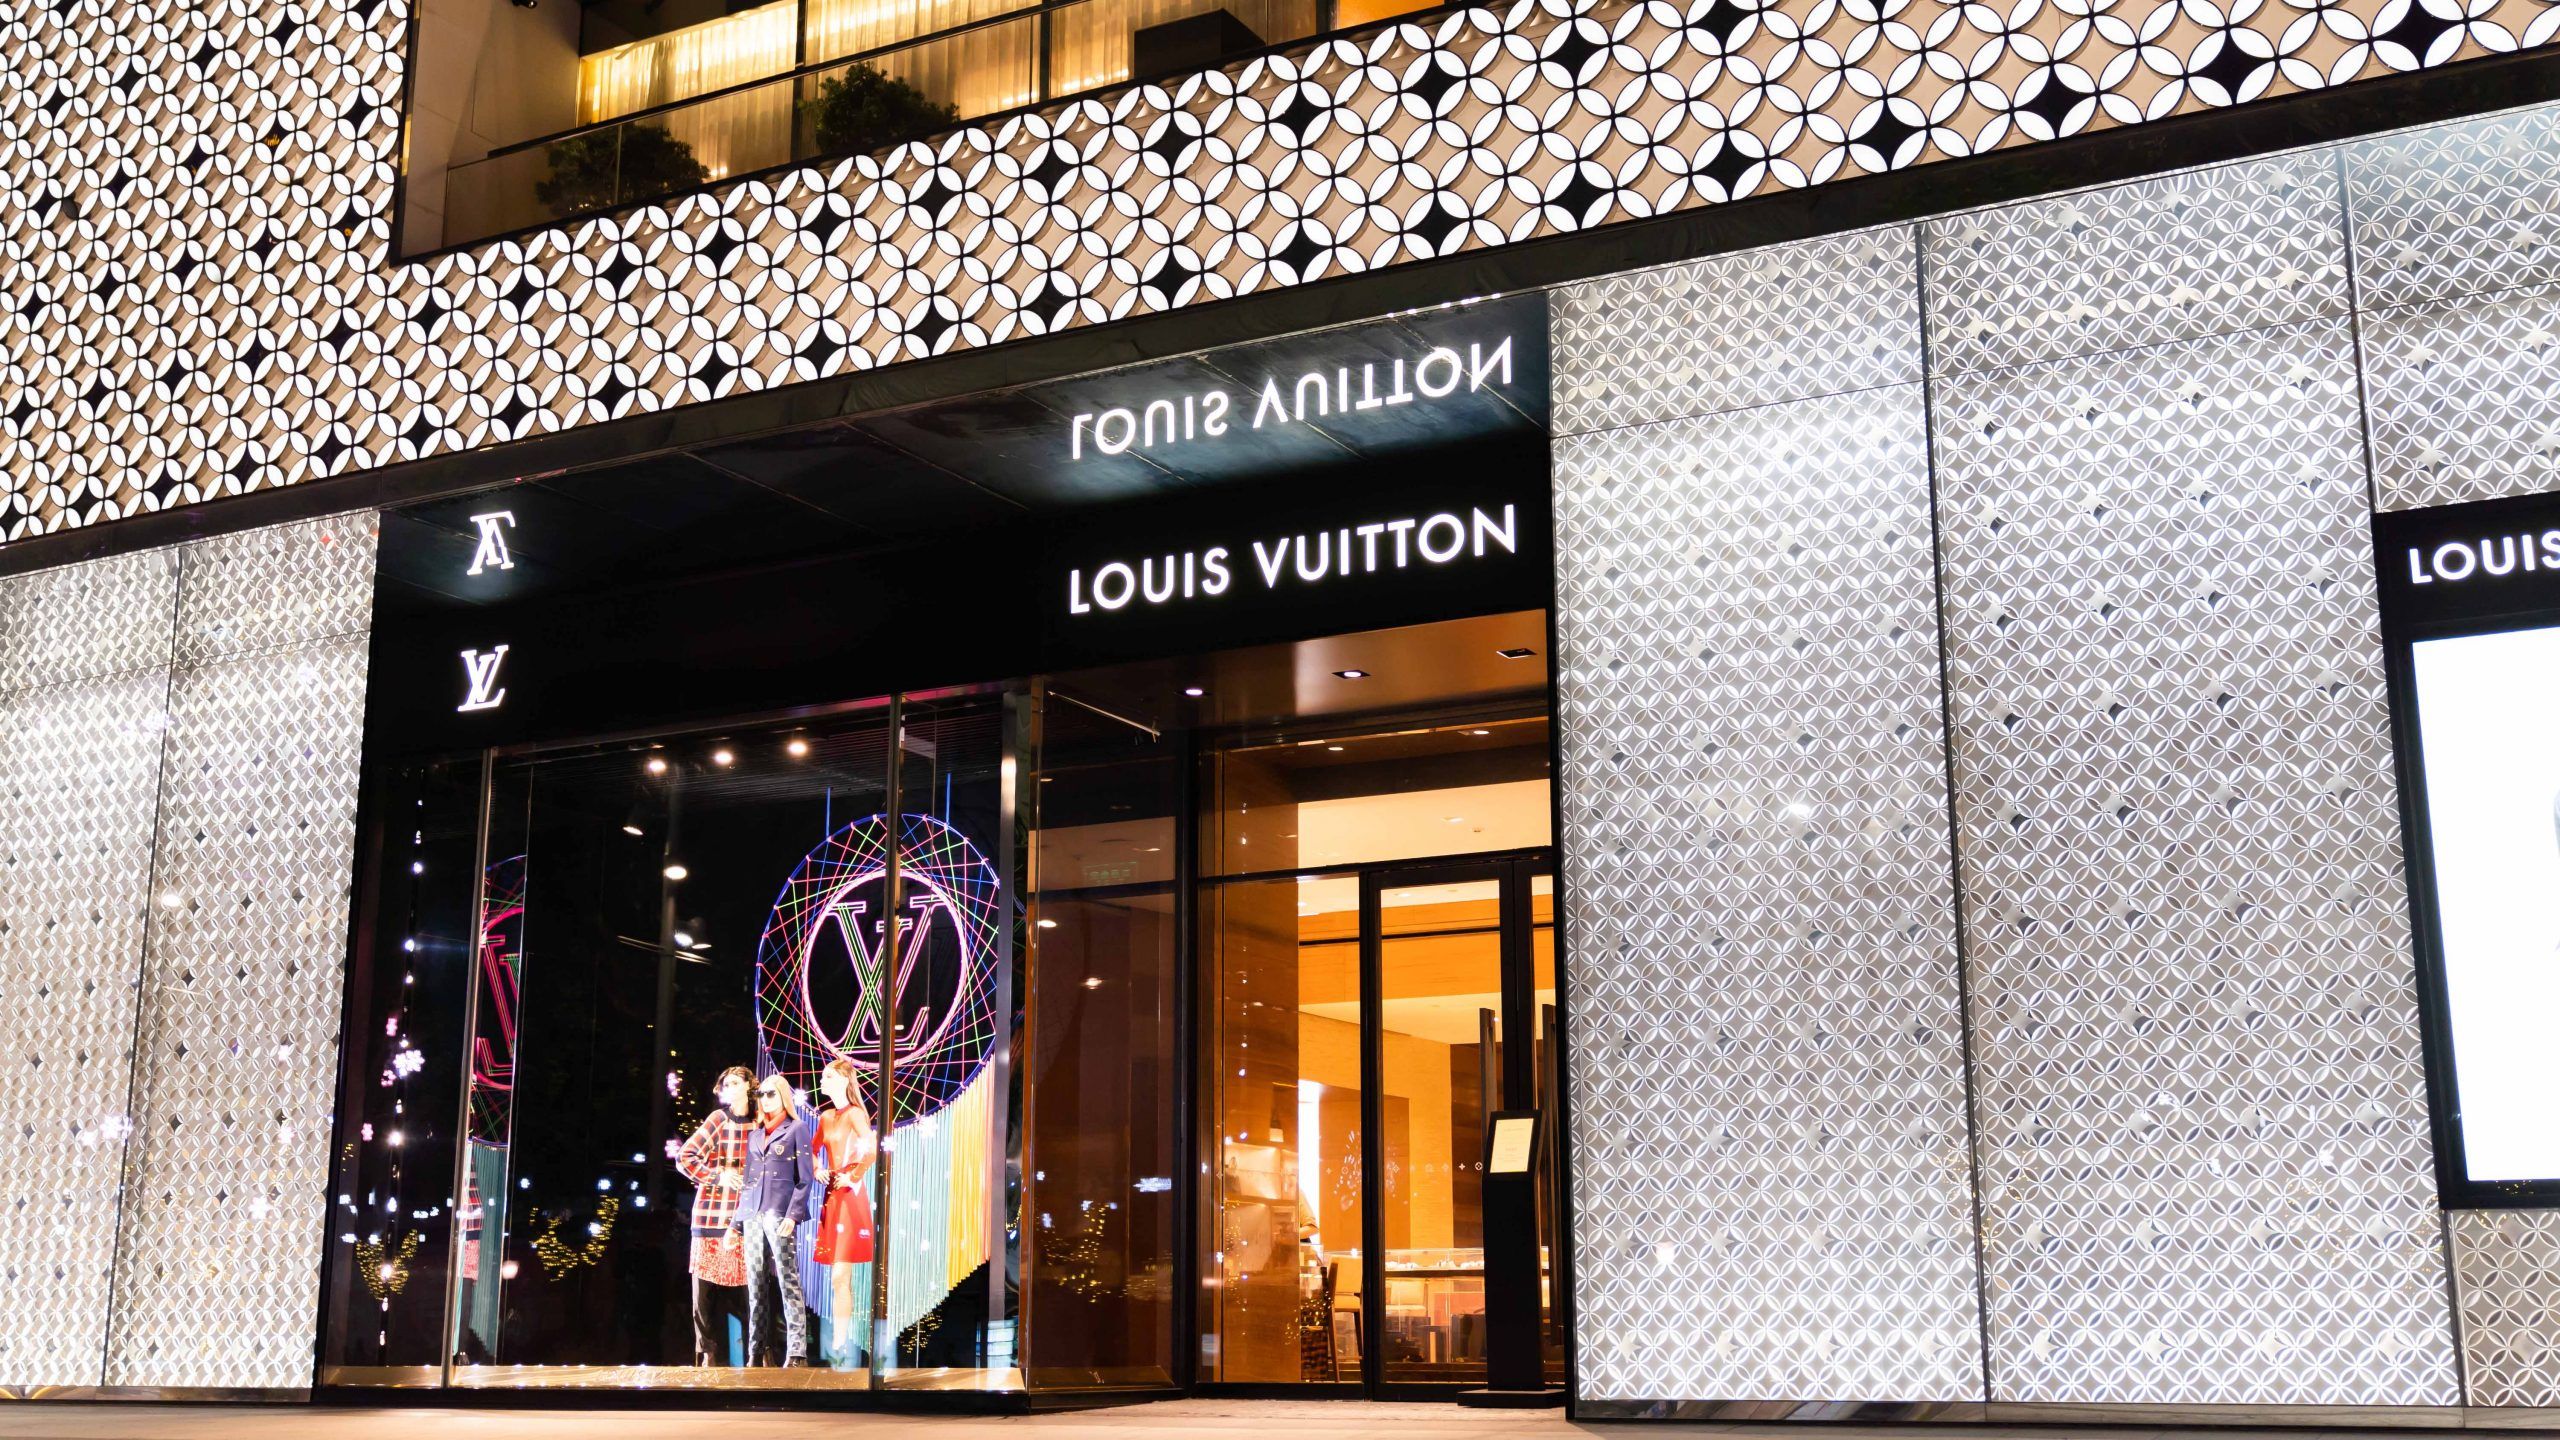 From boom to uncertainty: Luxury brands face uphill battle as China's growth slows